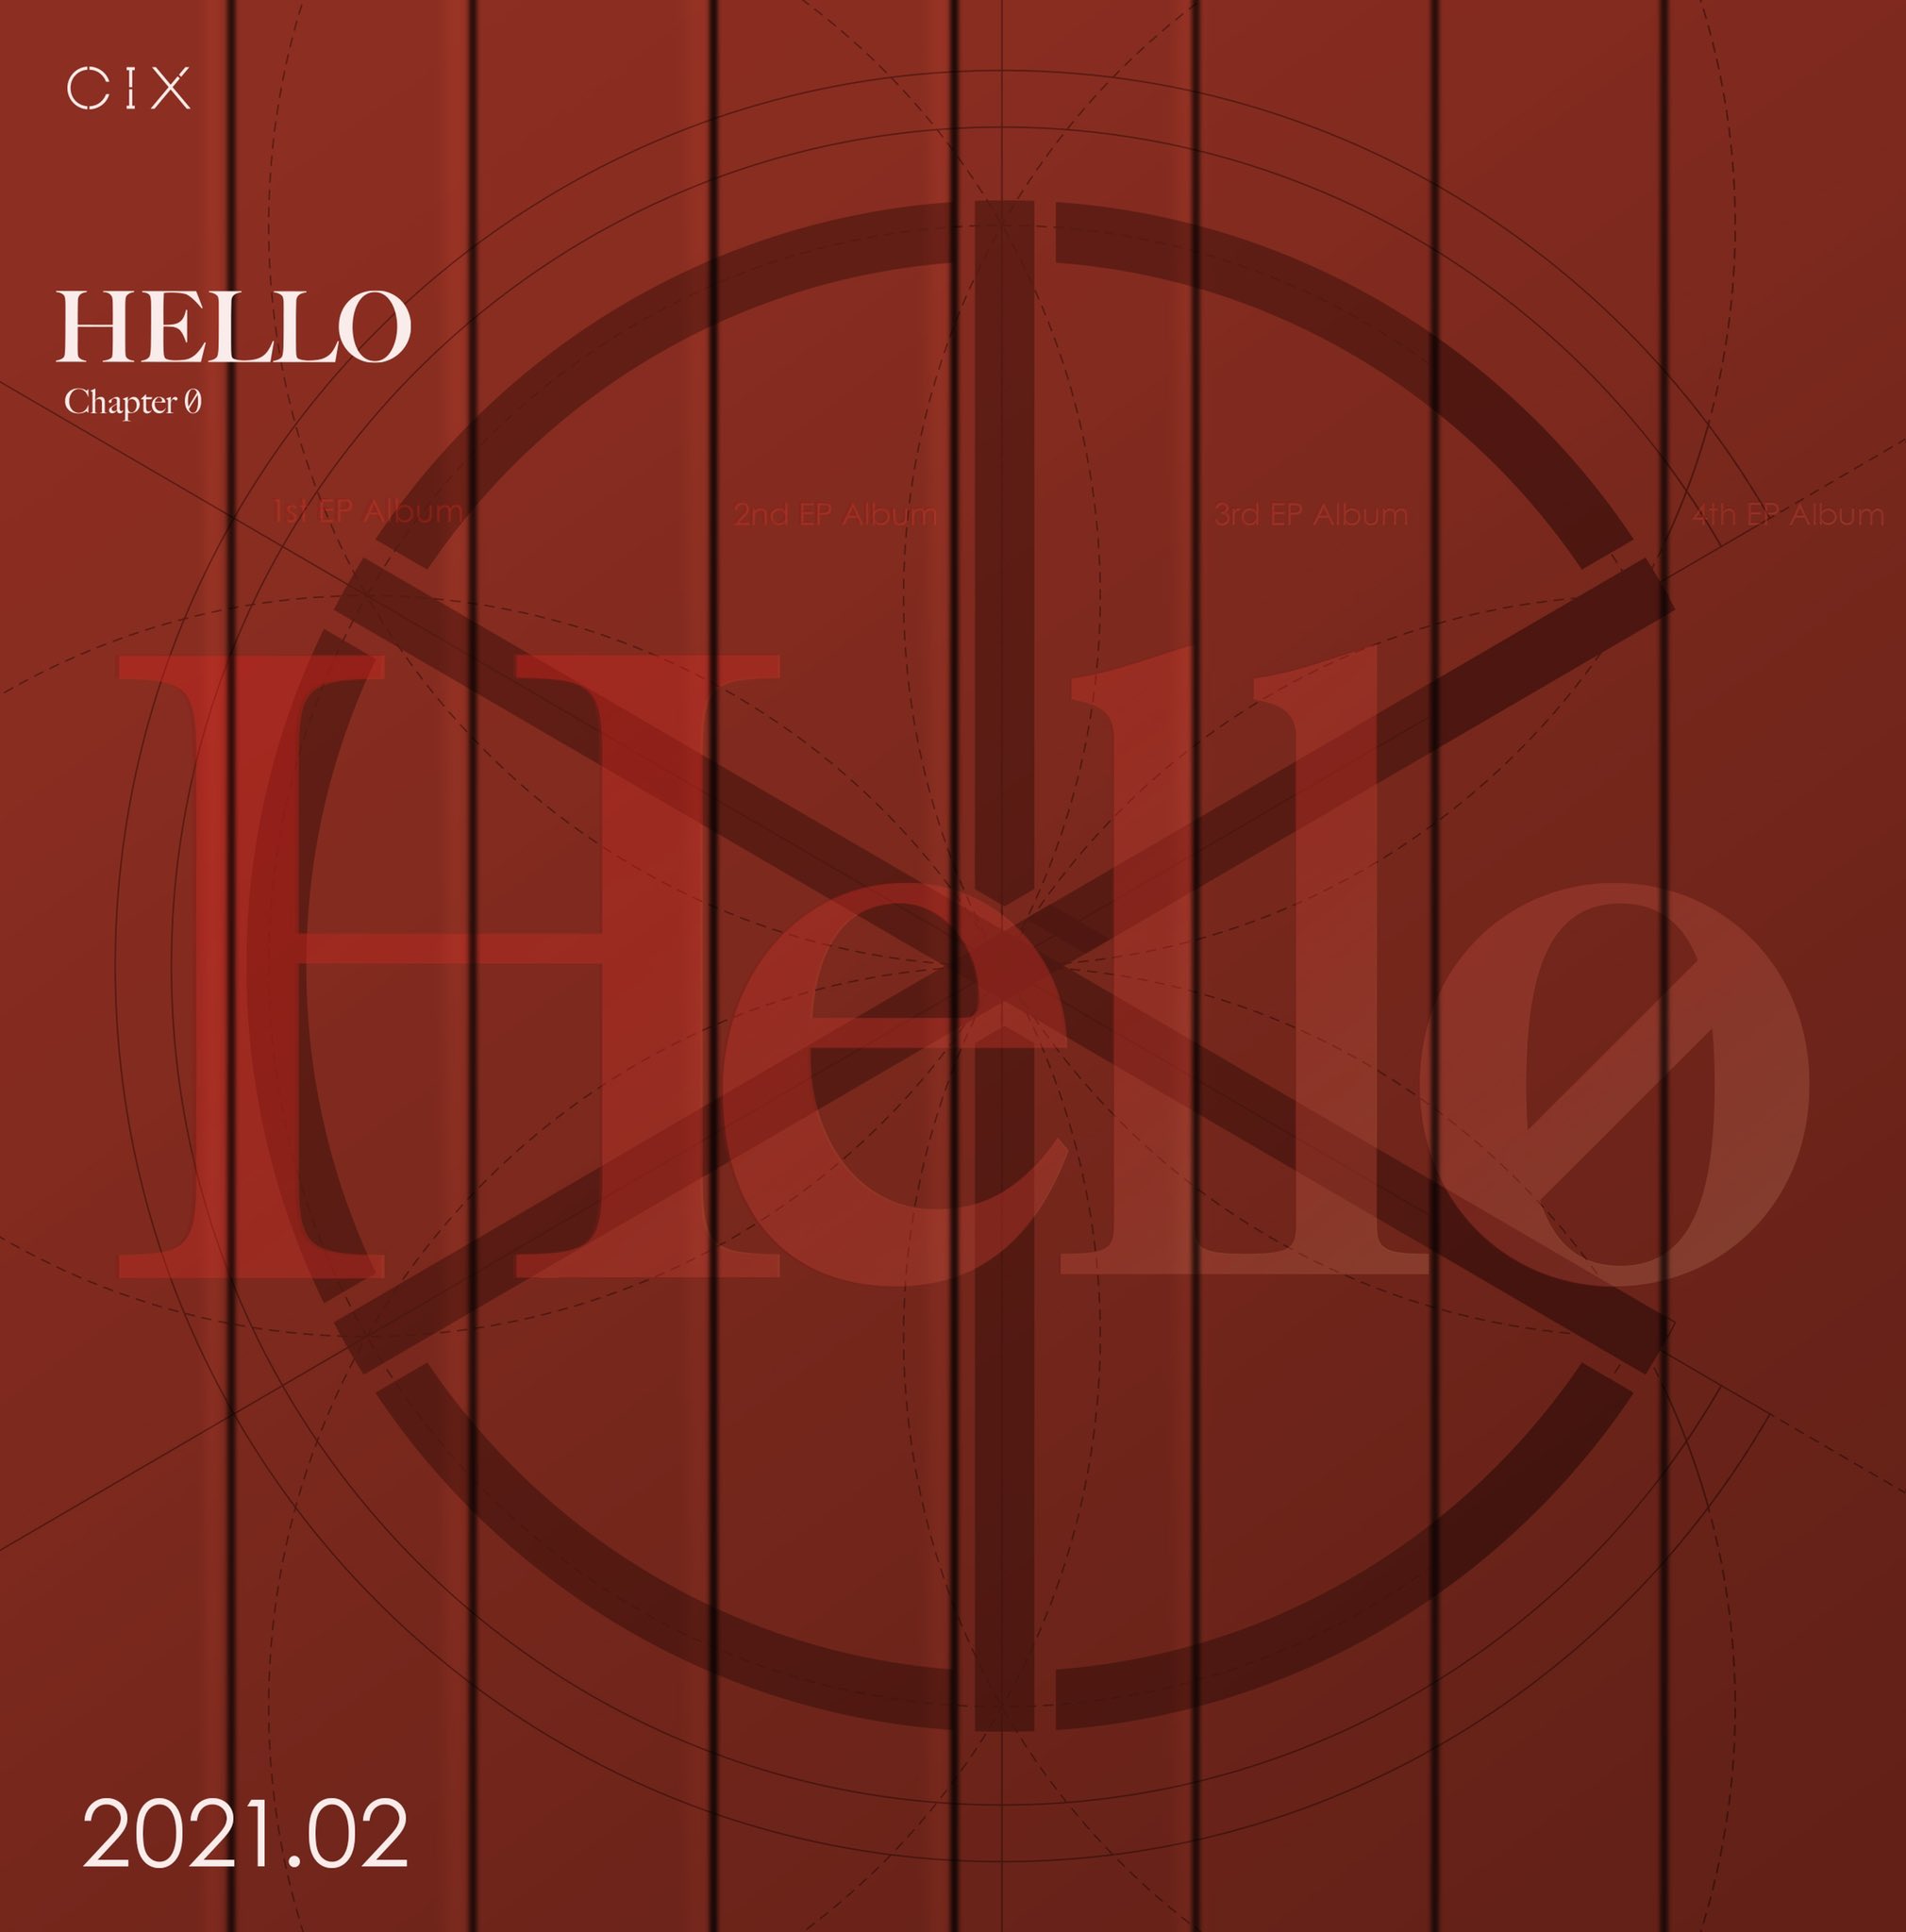 cix-to-make-comeback-with-new-album-hello-chapter-0-in-february